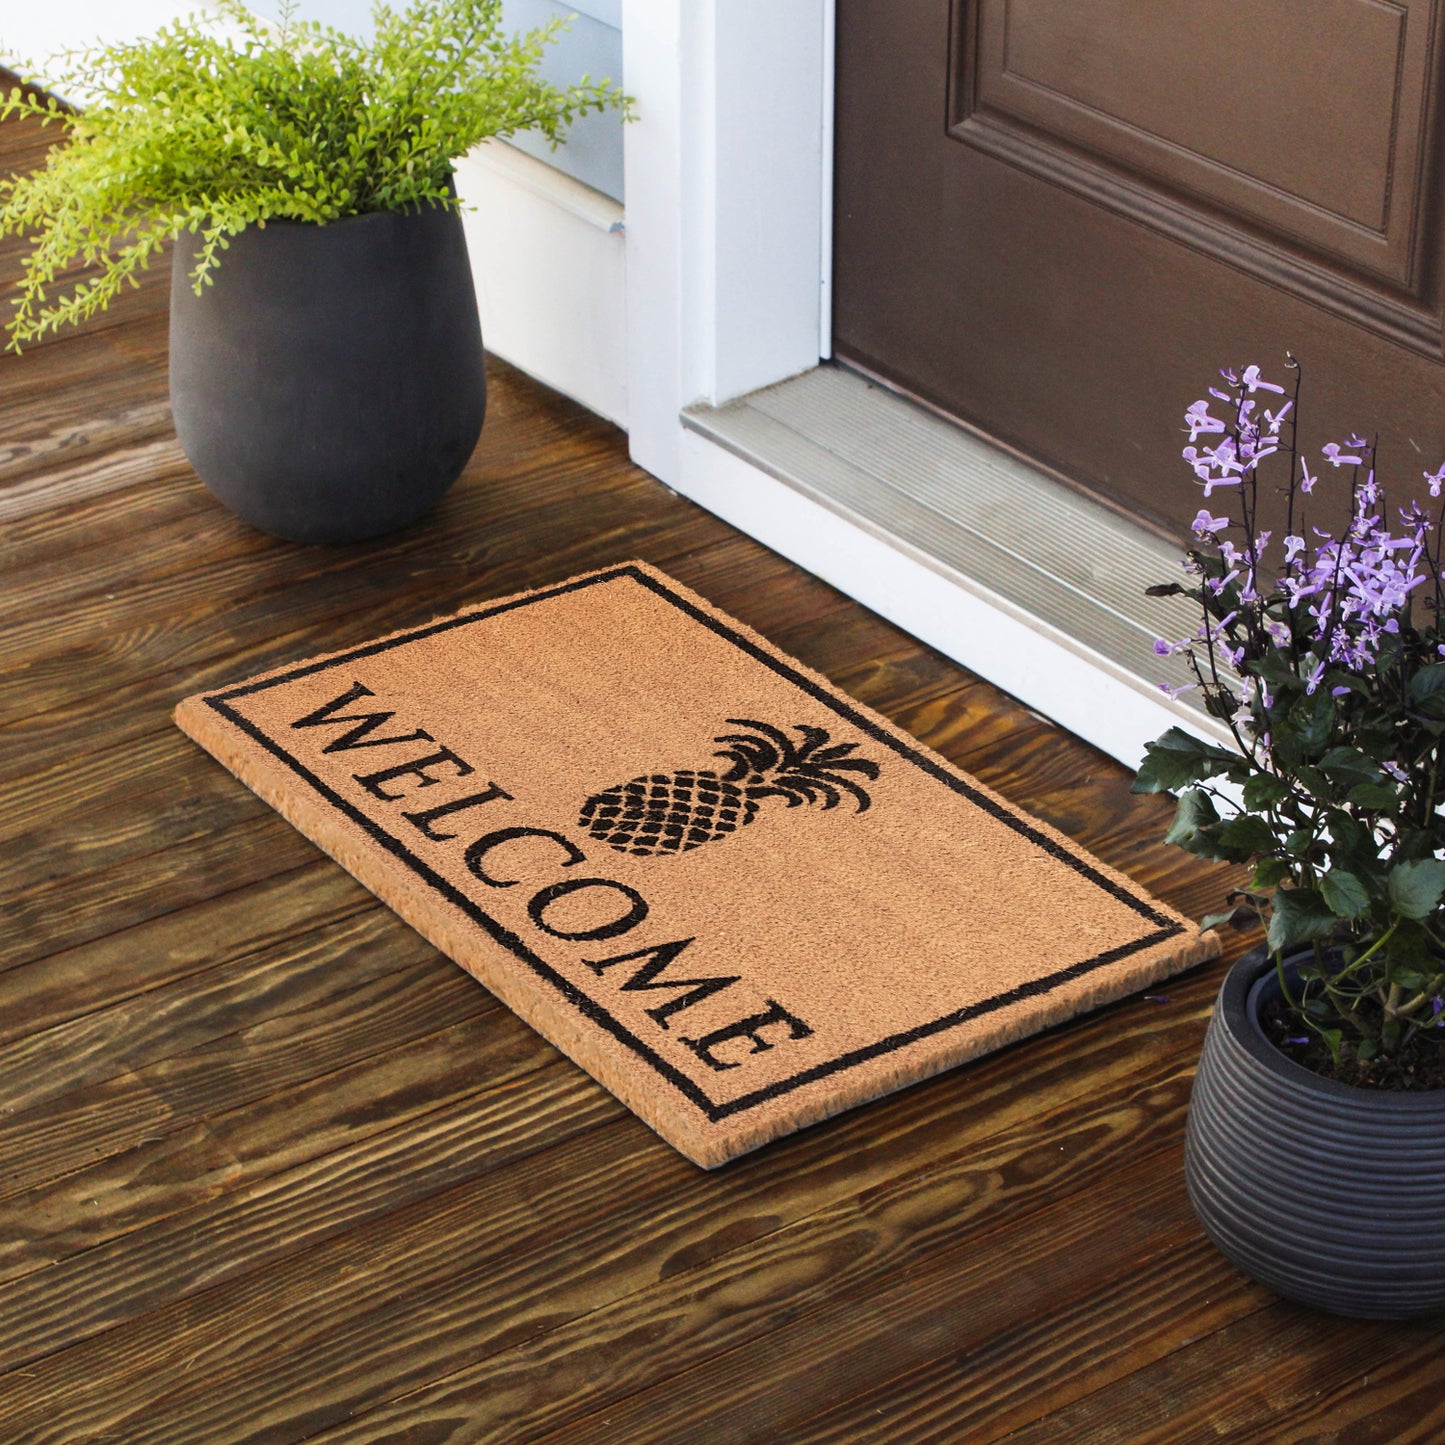 Avera Products "Welcome" Classic Pineapple Coir Doormat